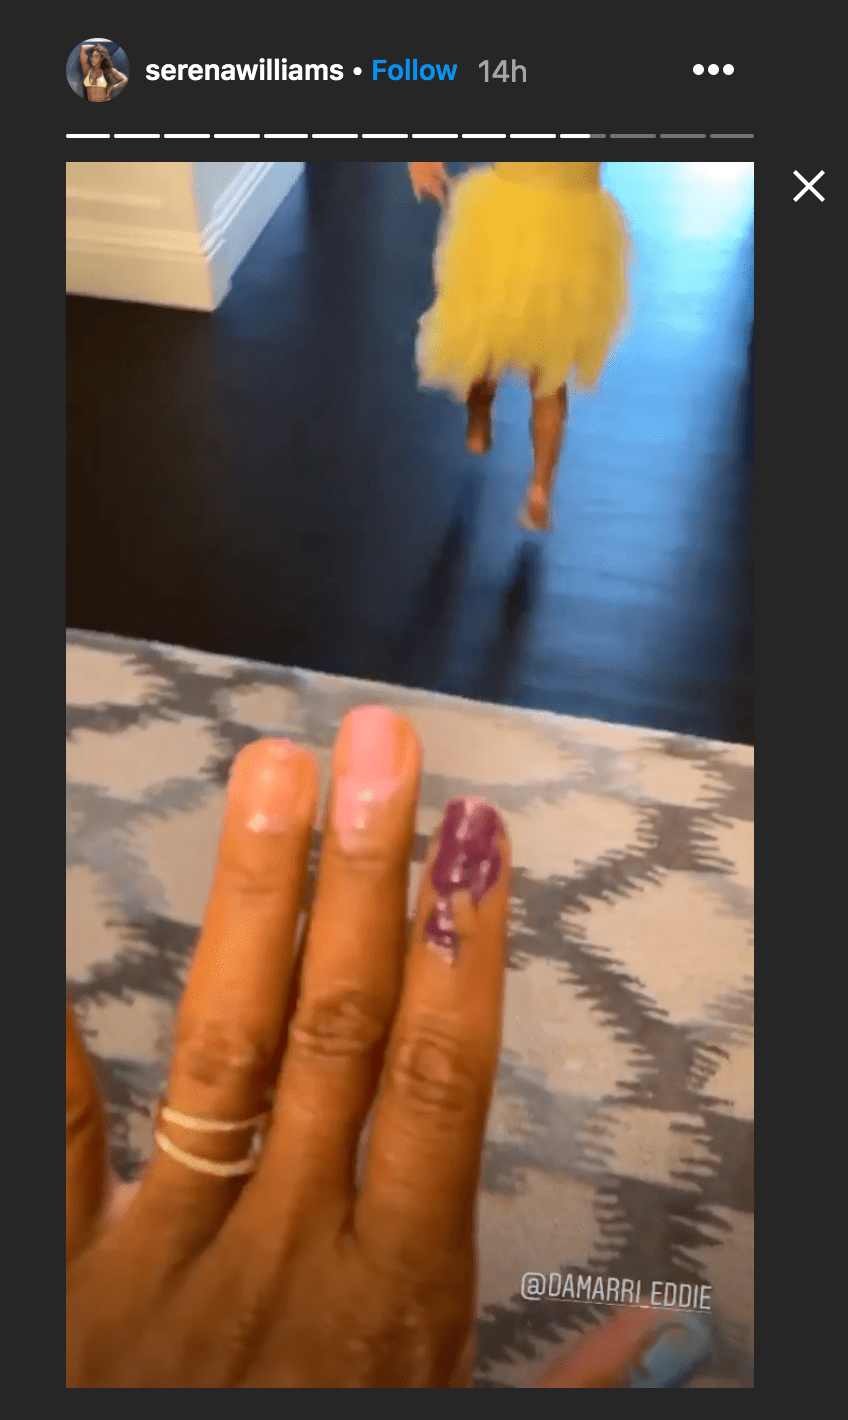 Serena Williams displayed her nails after they were painted by her daughter Olympia Ohanian | Source: Instagram.com/serenawilliams